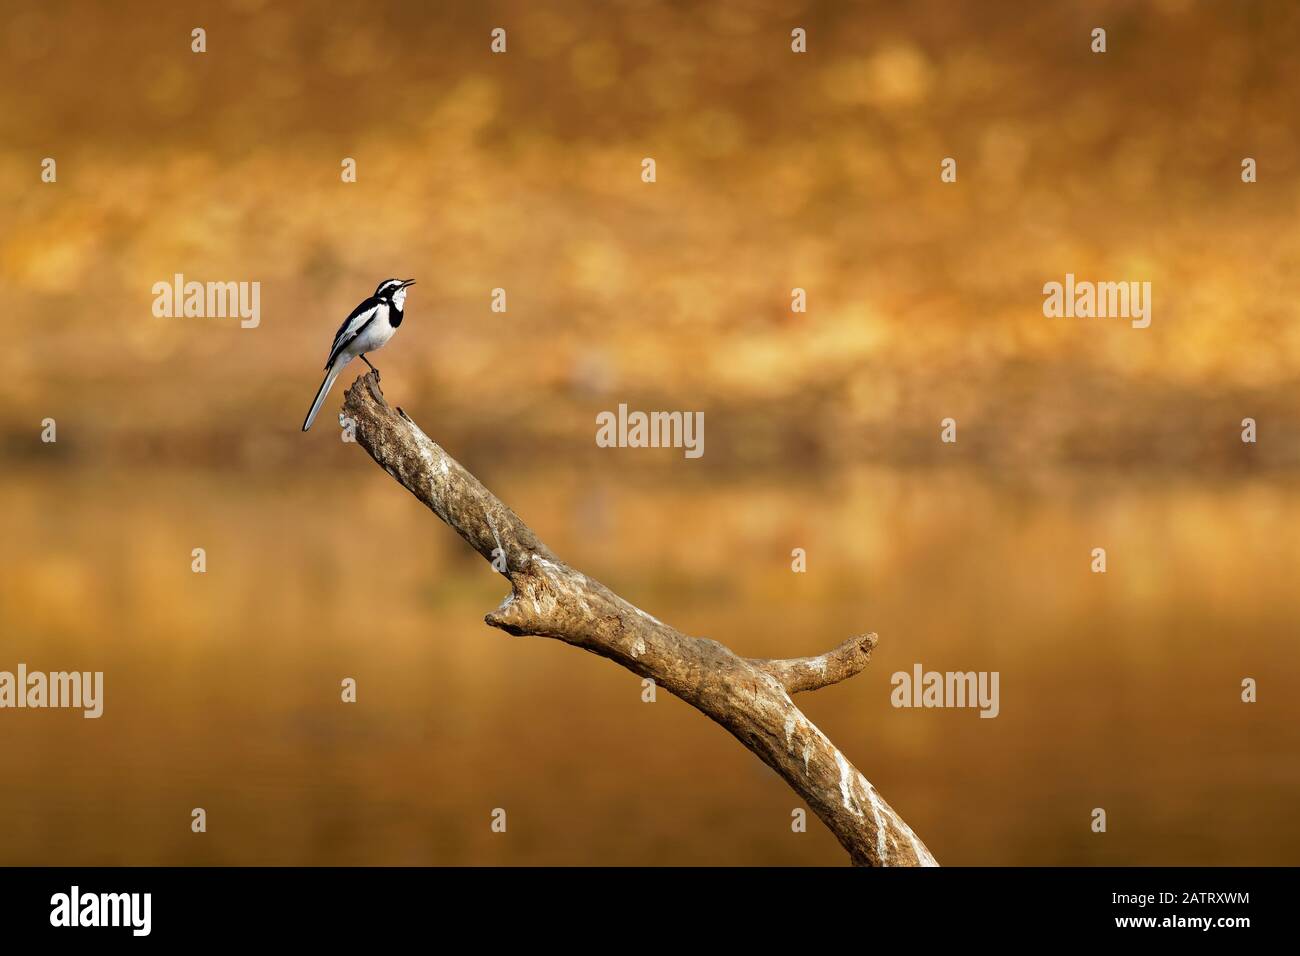 African Pied Wagtail - Motacilla aguimp species of bird in the family Motacillidae, striking black and white wagtail on the golden sunset background. Stock Photo